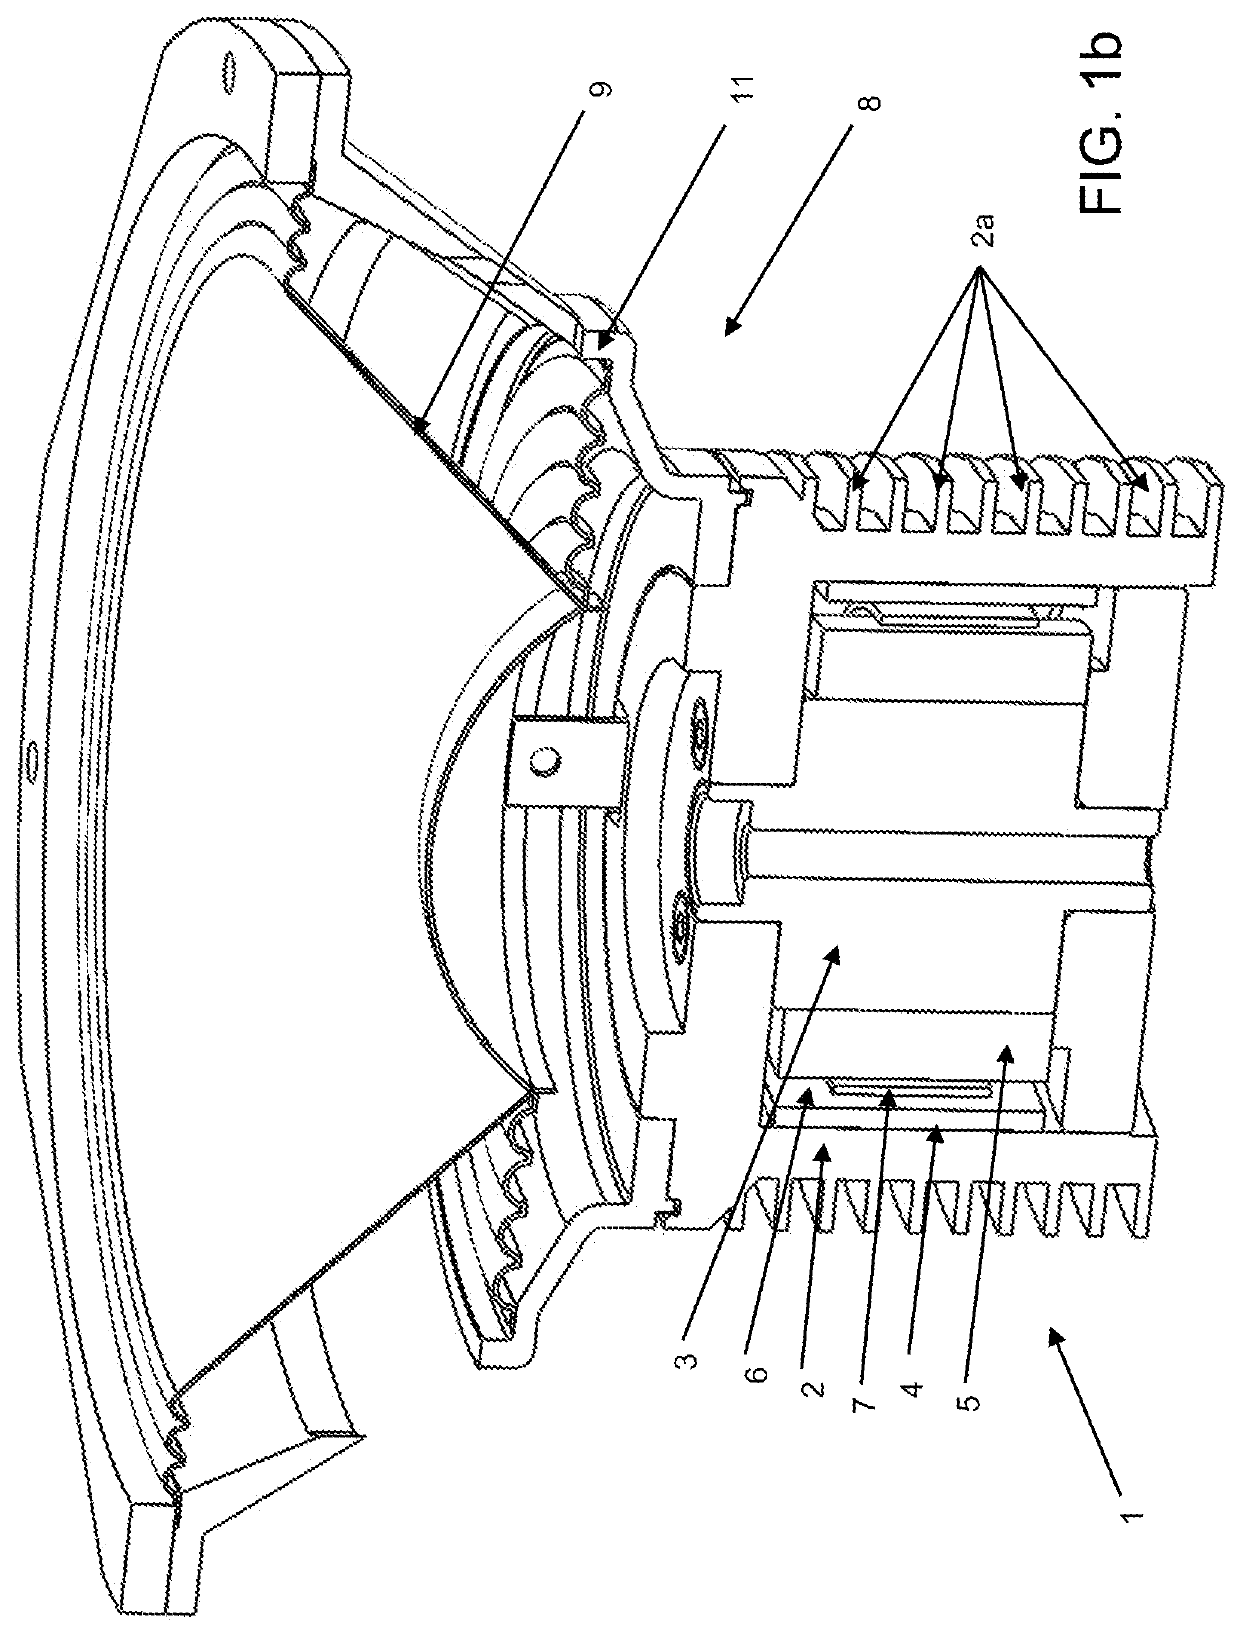 System for cooling the stationary winding of an induction motor